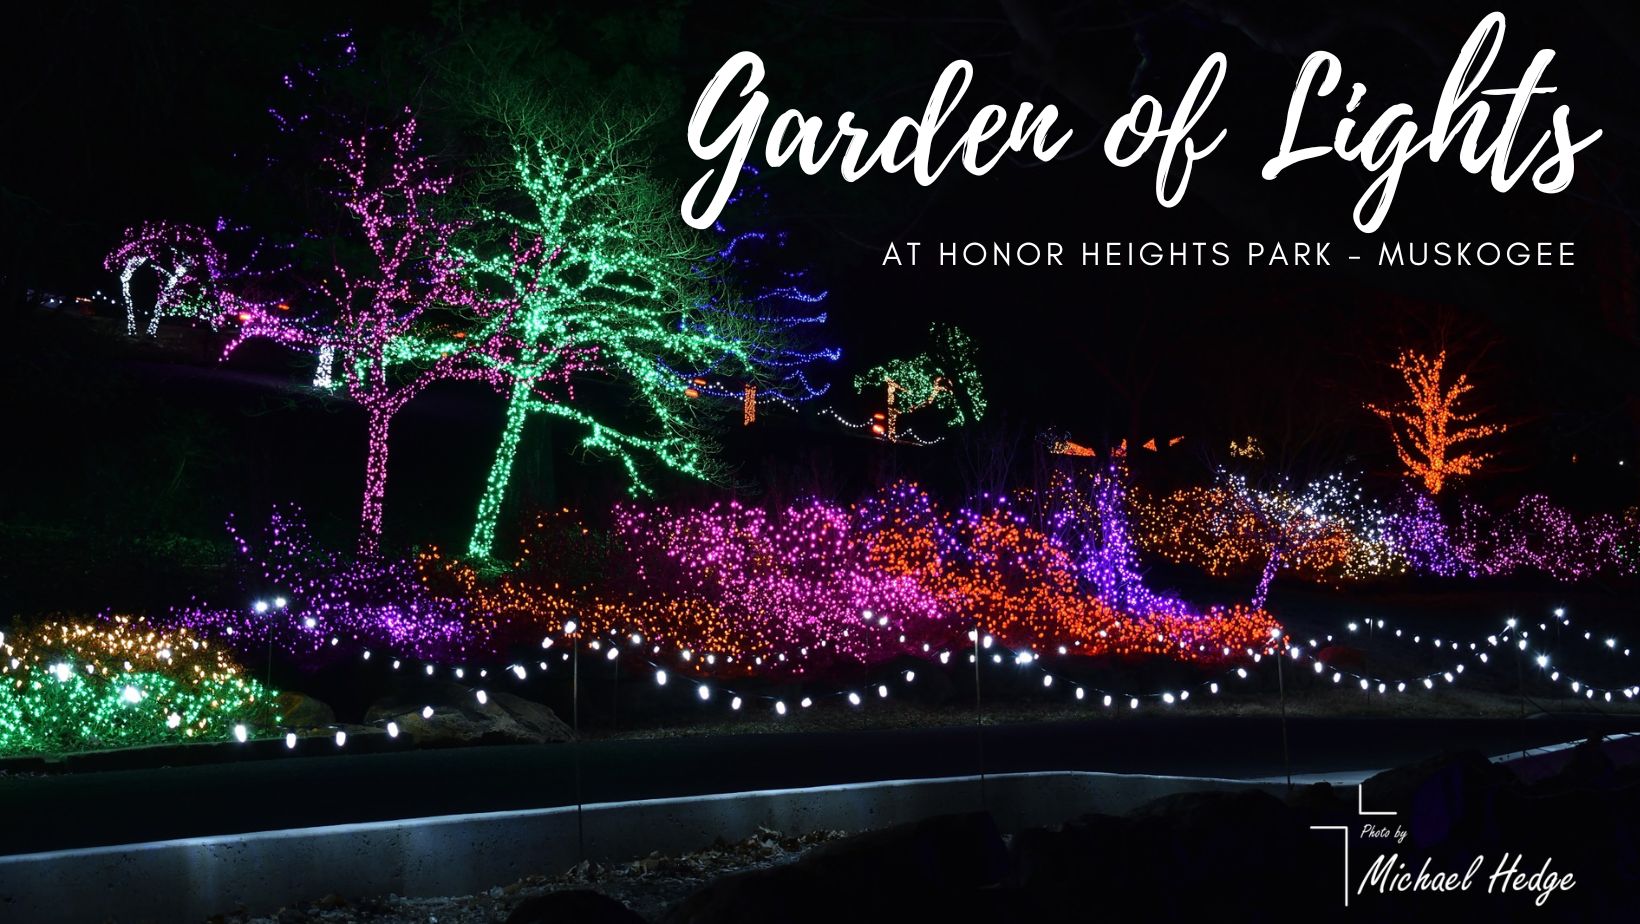 Garden of Lights at Honor Heights Park Visit Muskogee